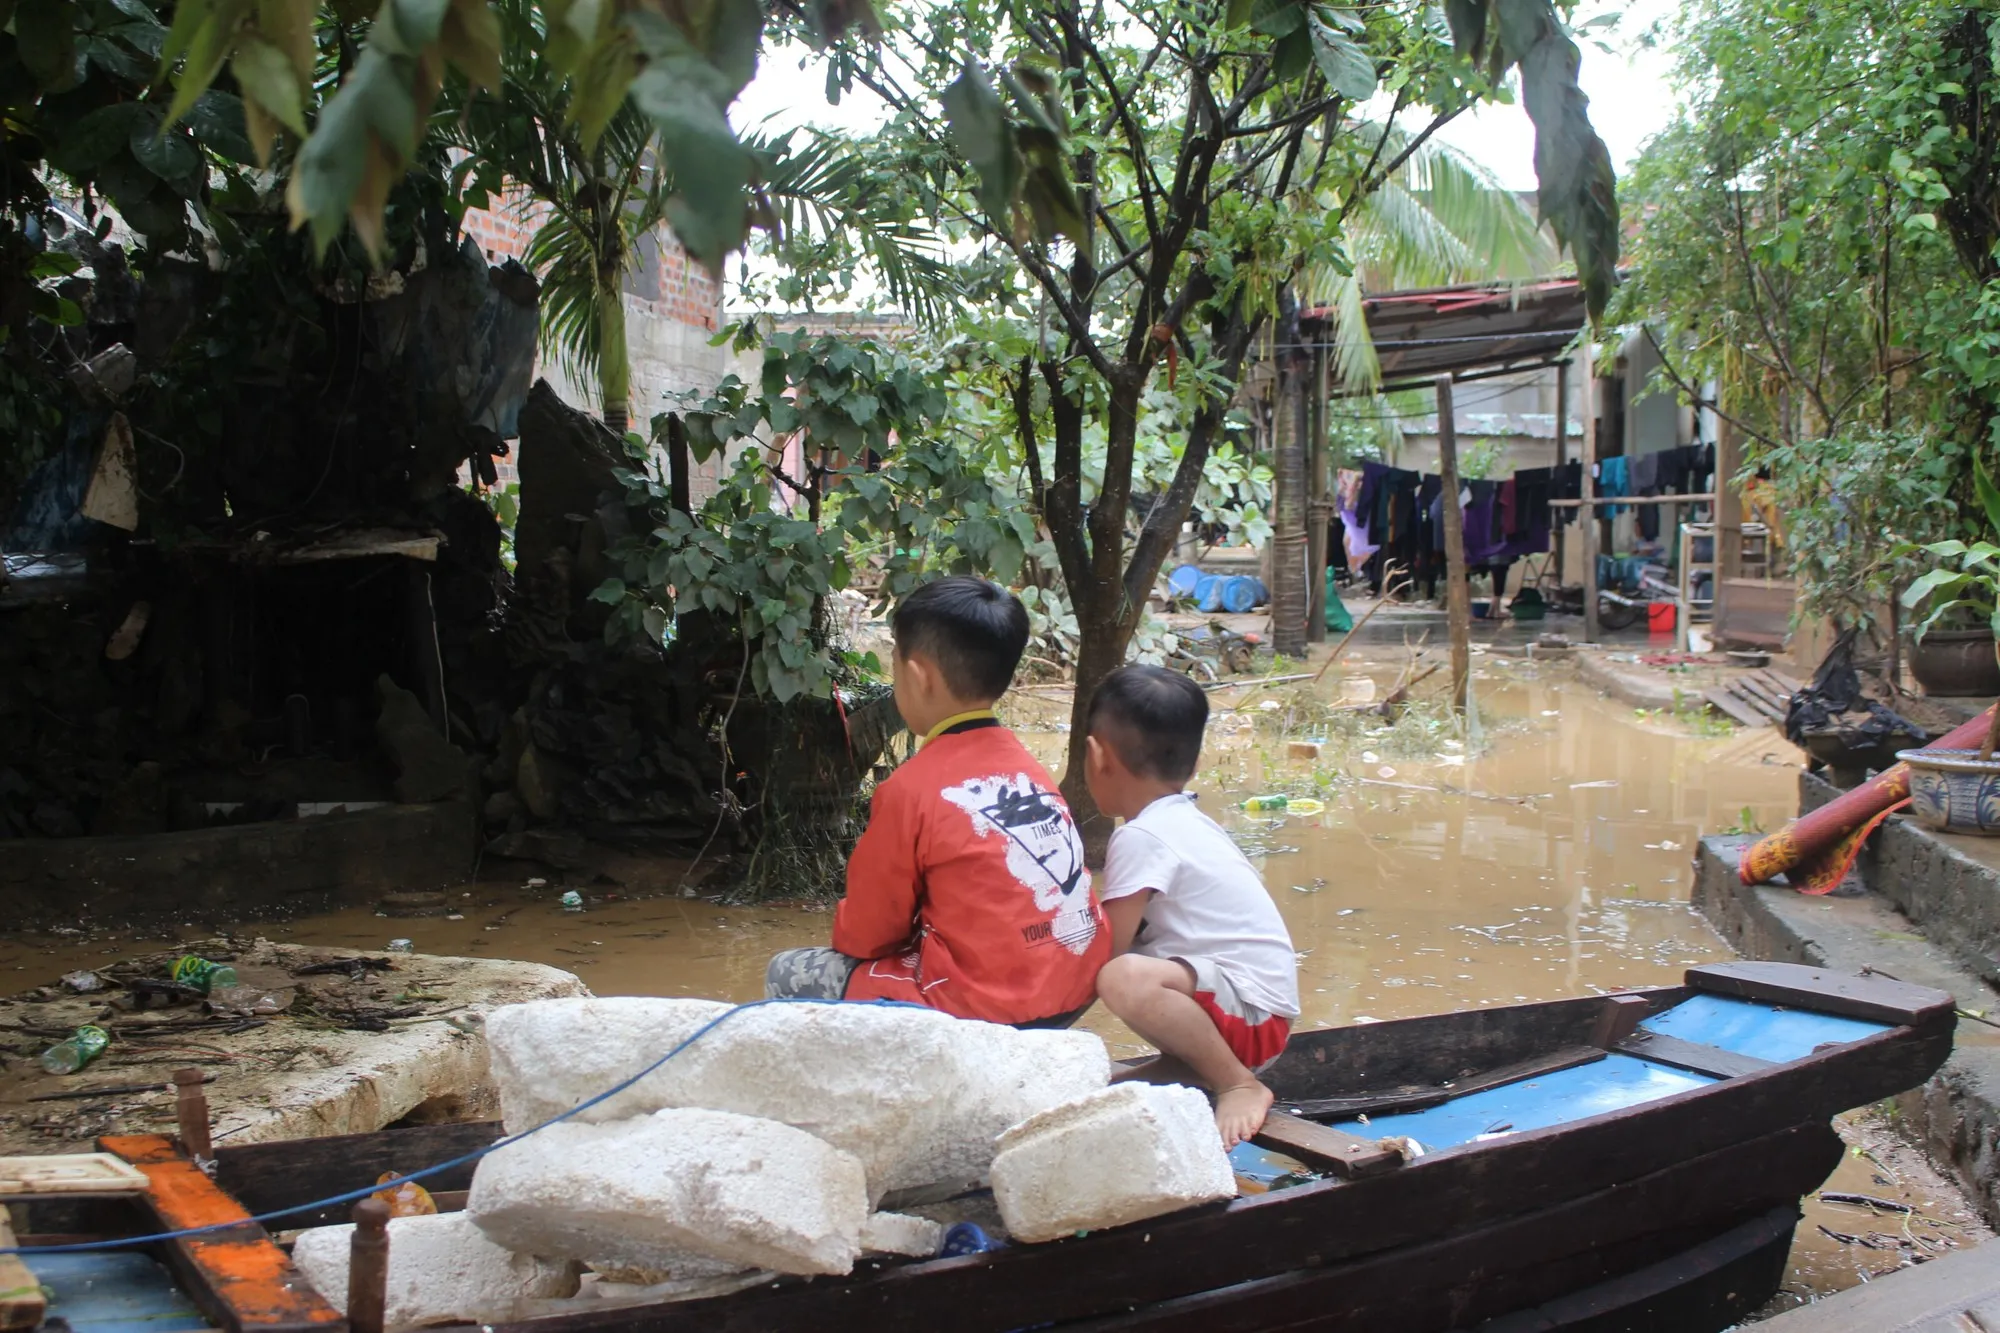 two children sit on a small boat in a flooded village.